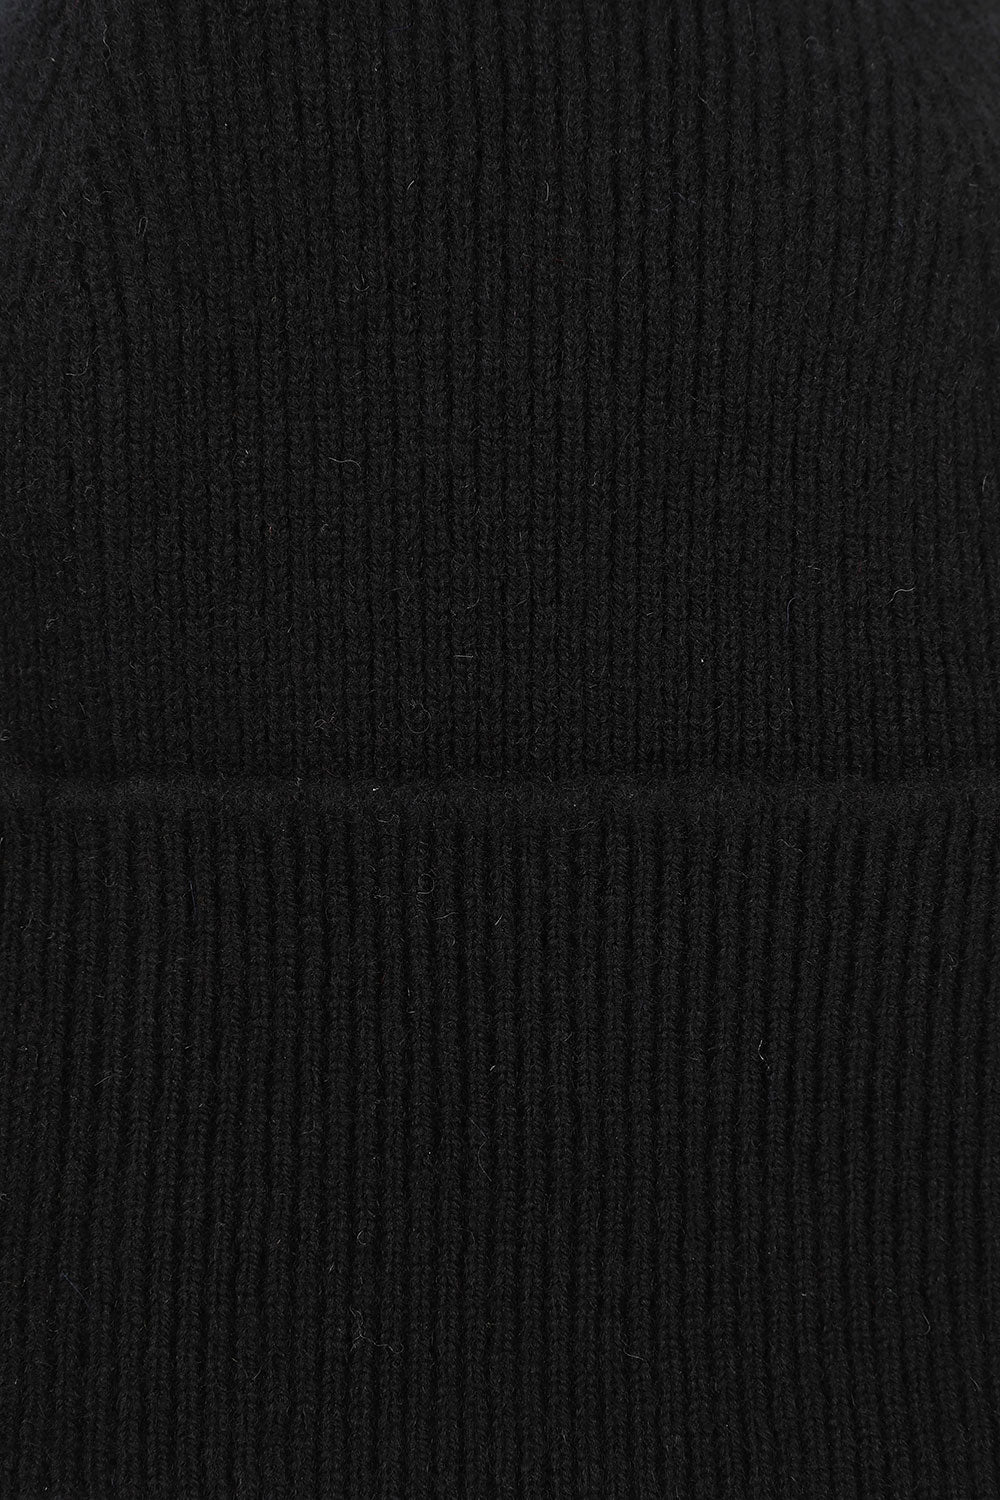 Close-up view of Uskees 4004 black wool hat, showing the texture of the natural lambswool.